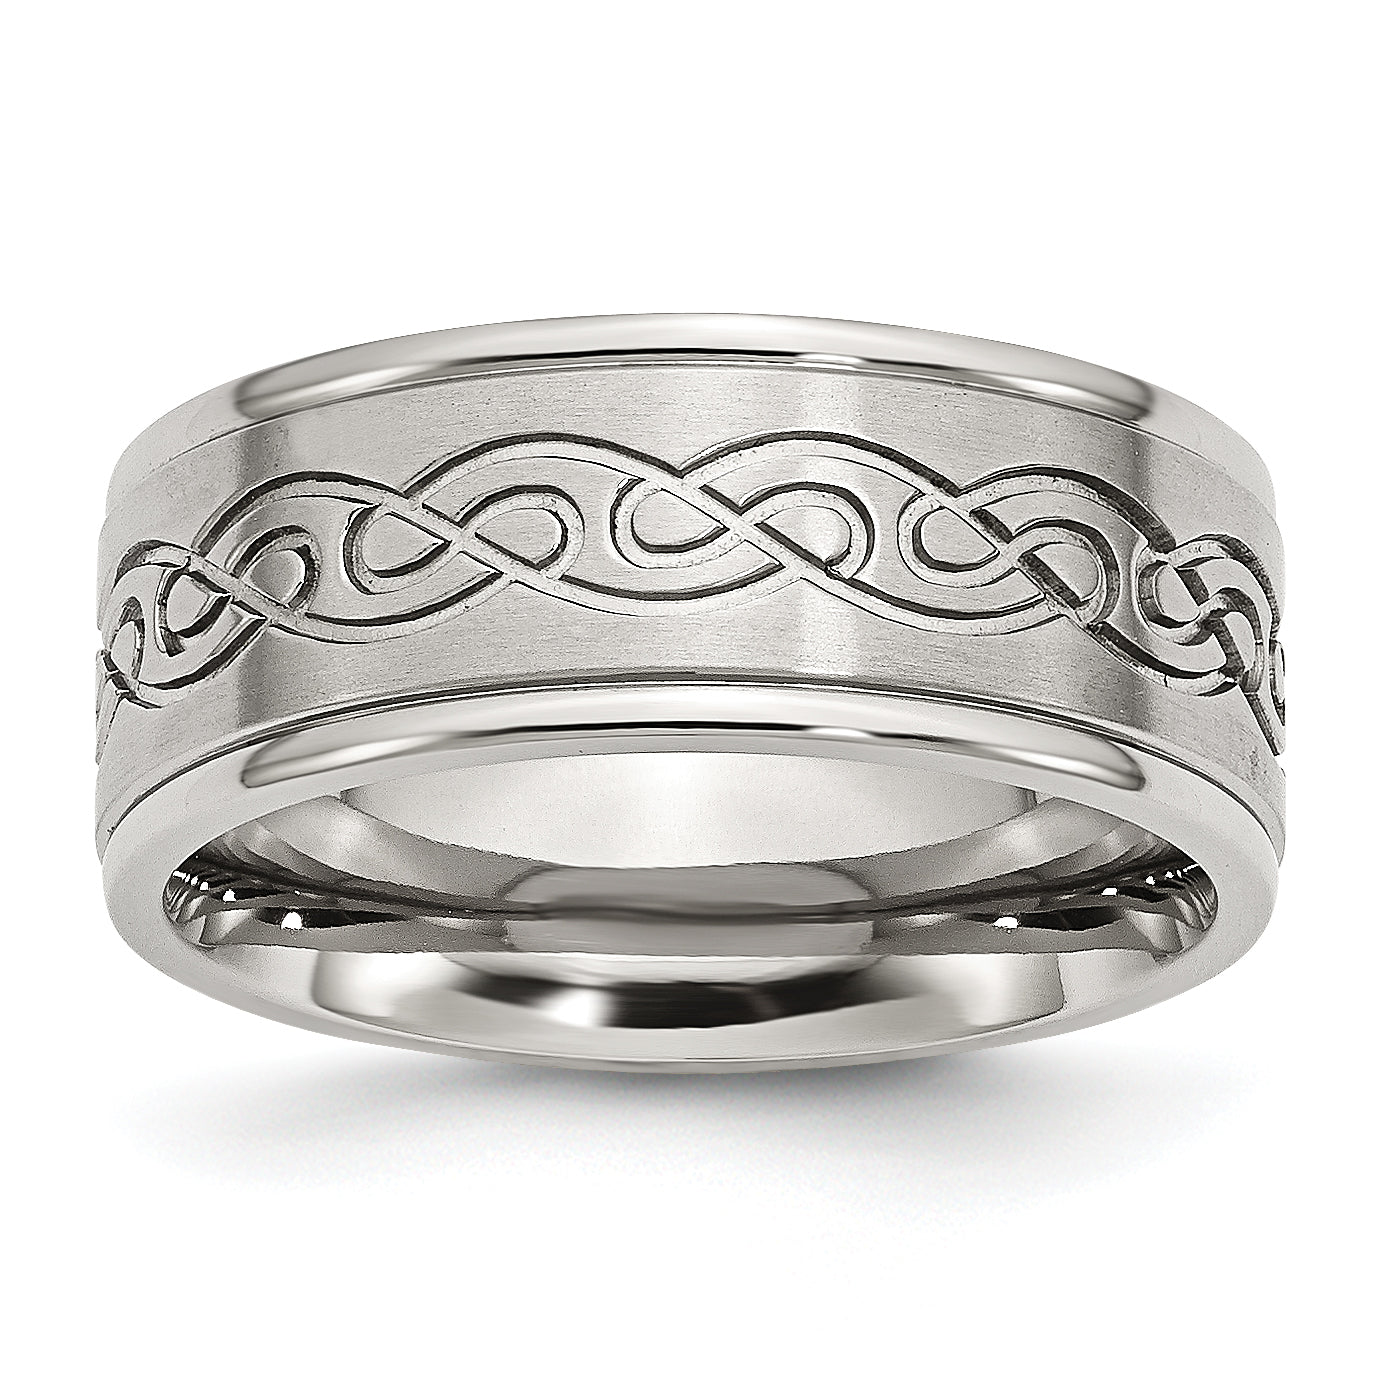 Stainless Steel Brushed and Polished Scroll Design 9mm Ridged Edge Band